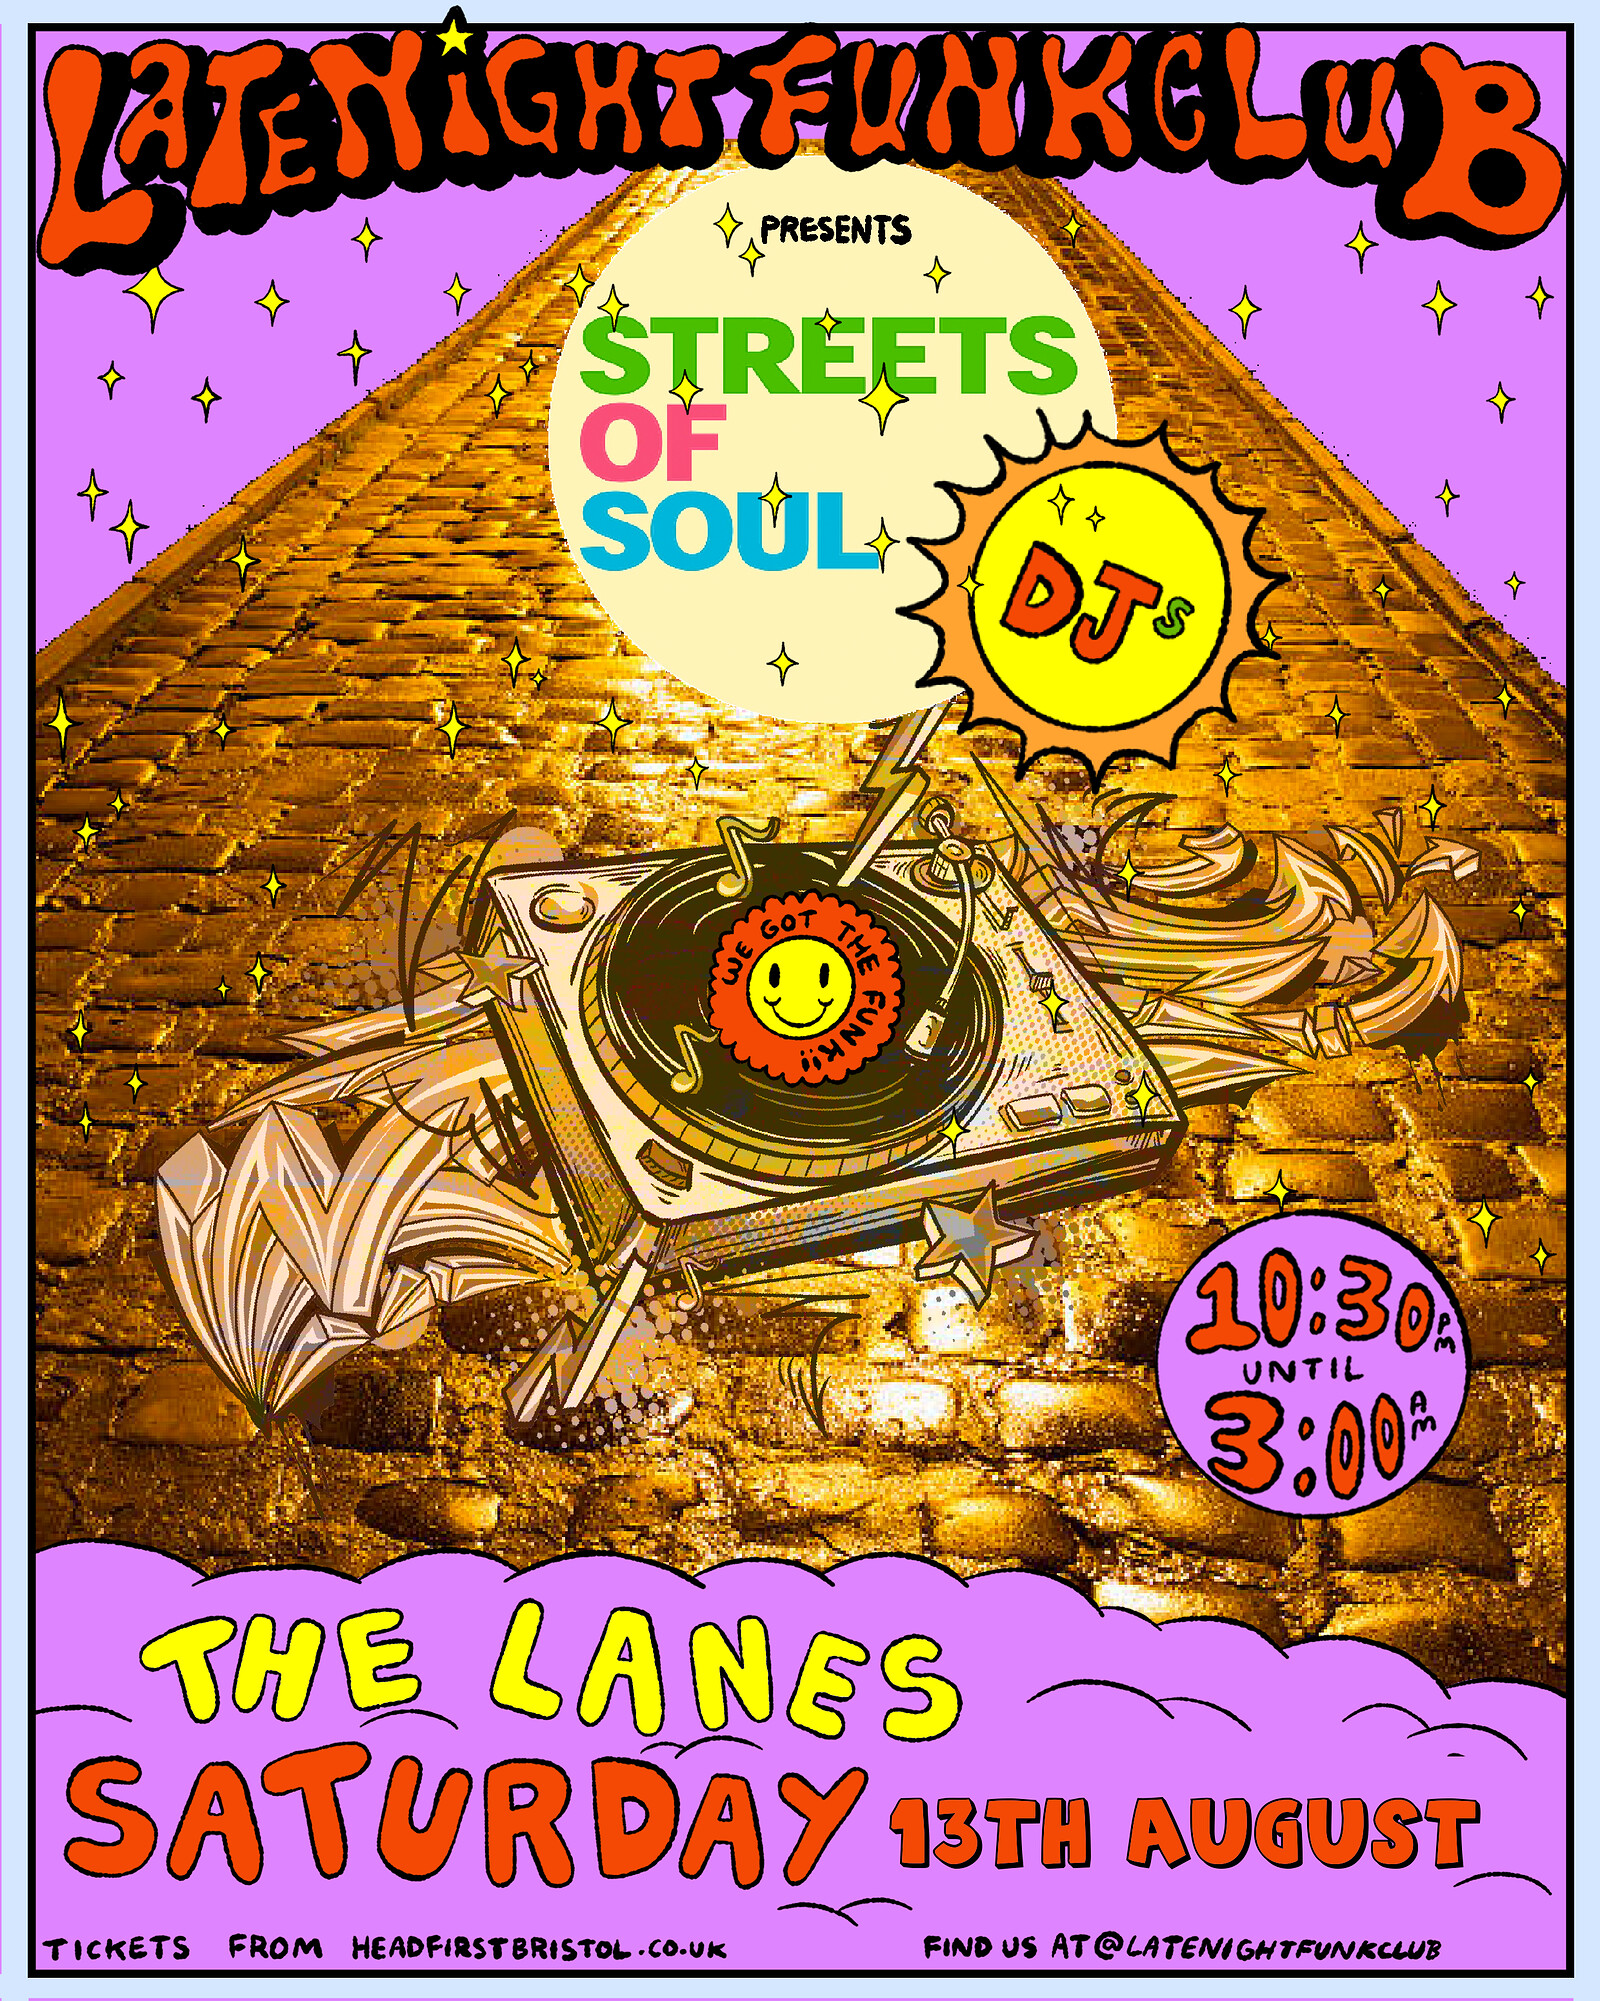 Late Night Funk Club: Streets Of Soul DJs All Nite at The Lanes